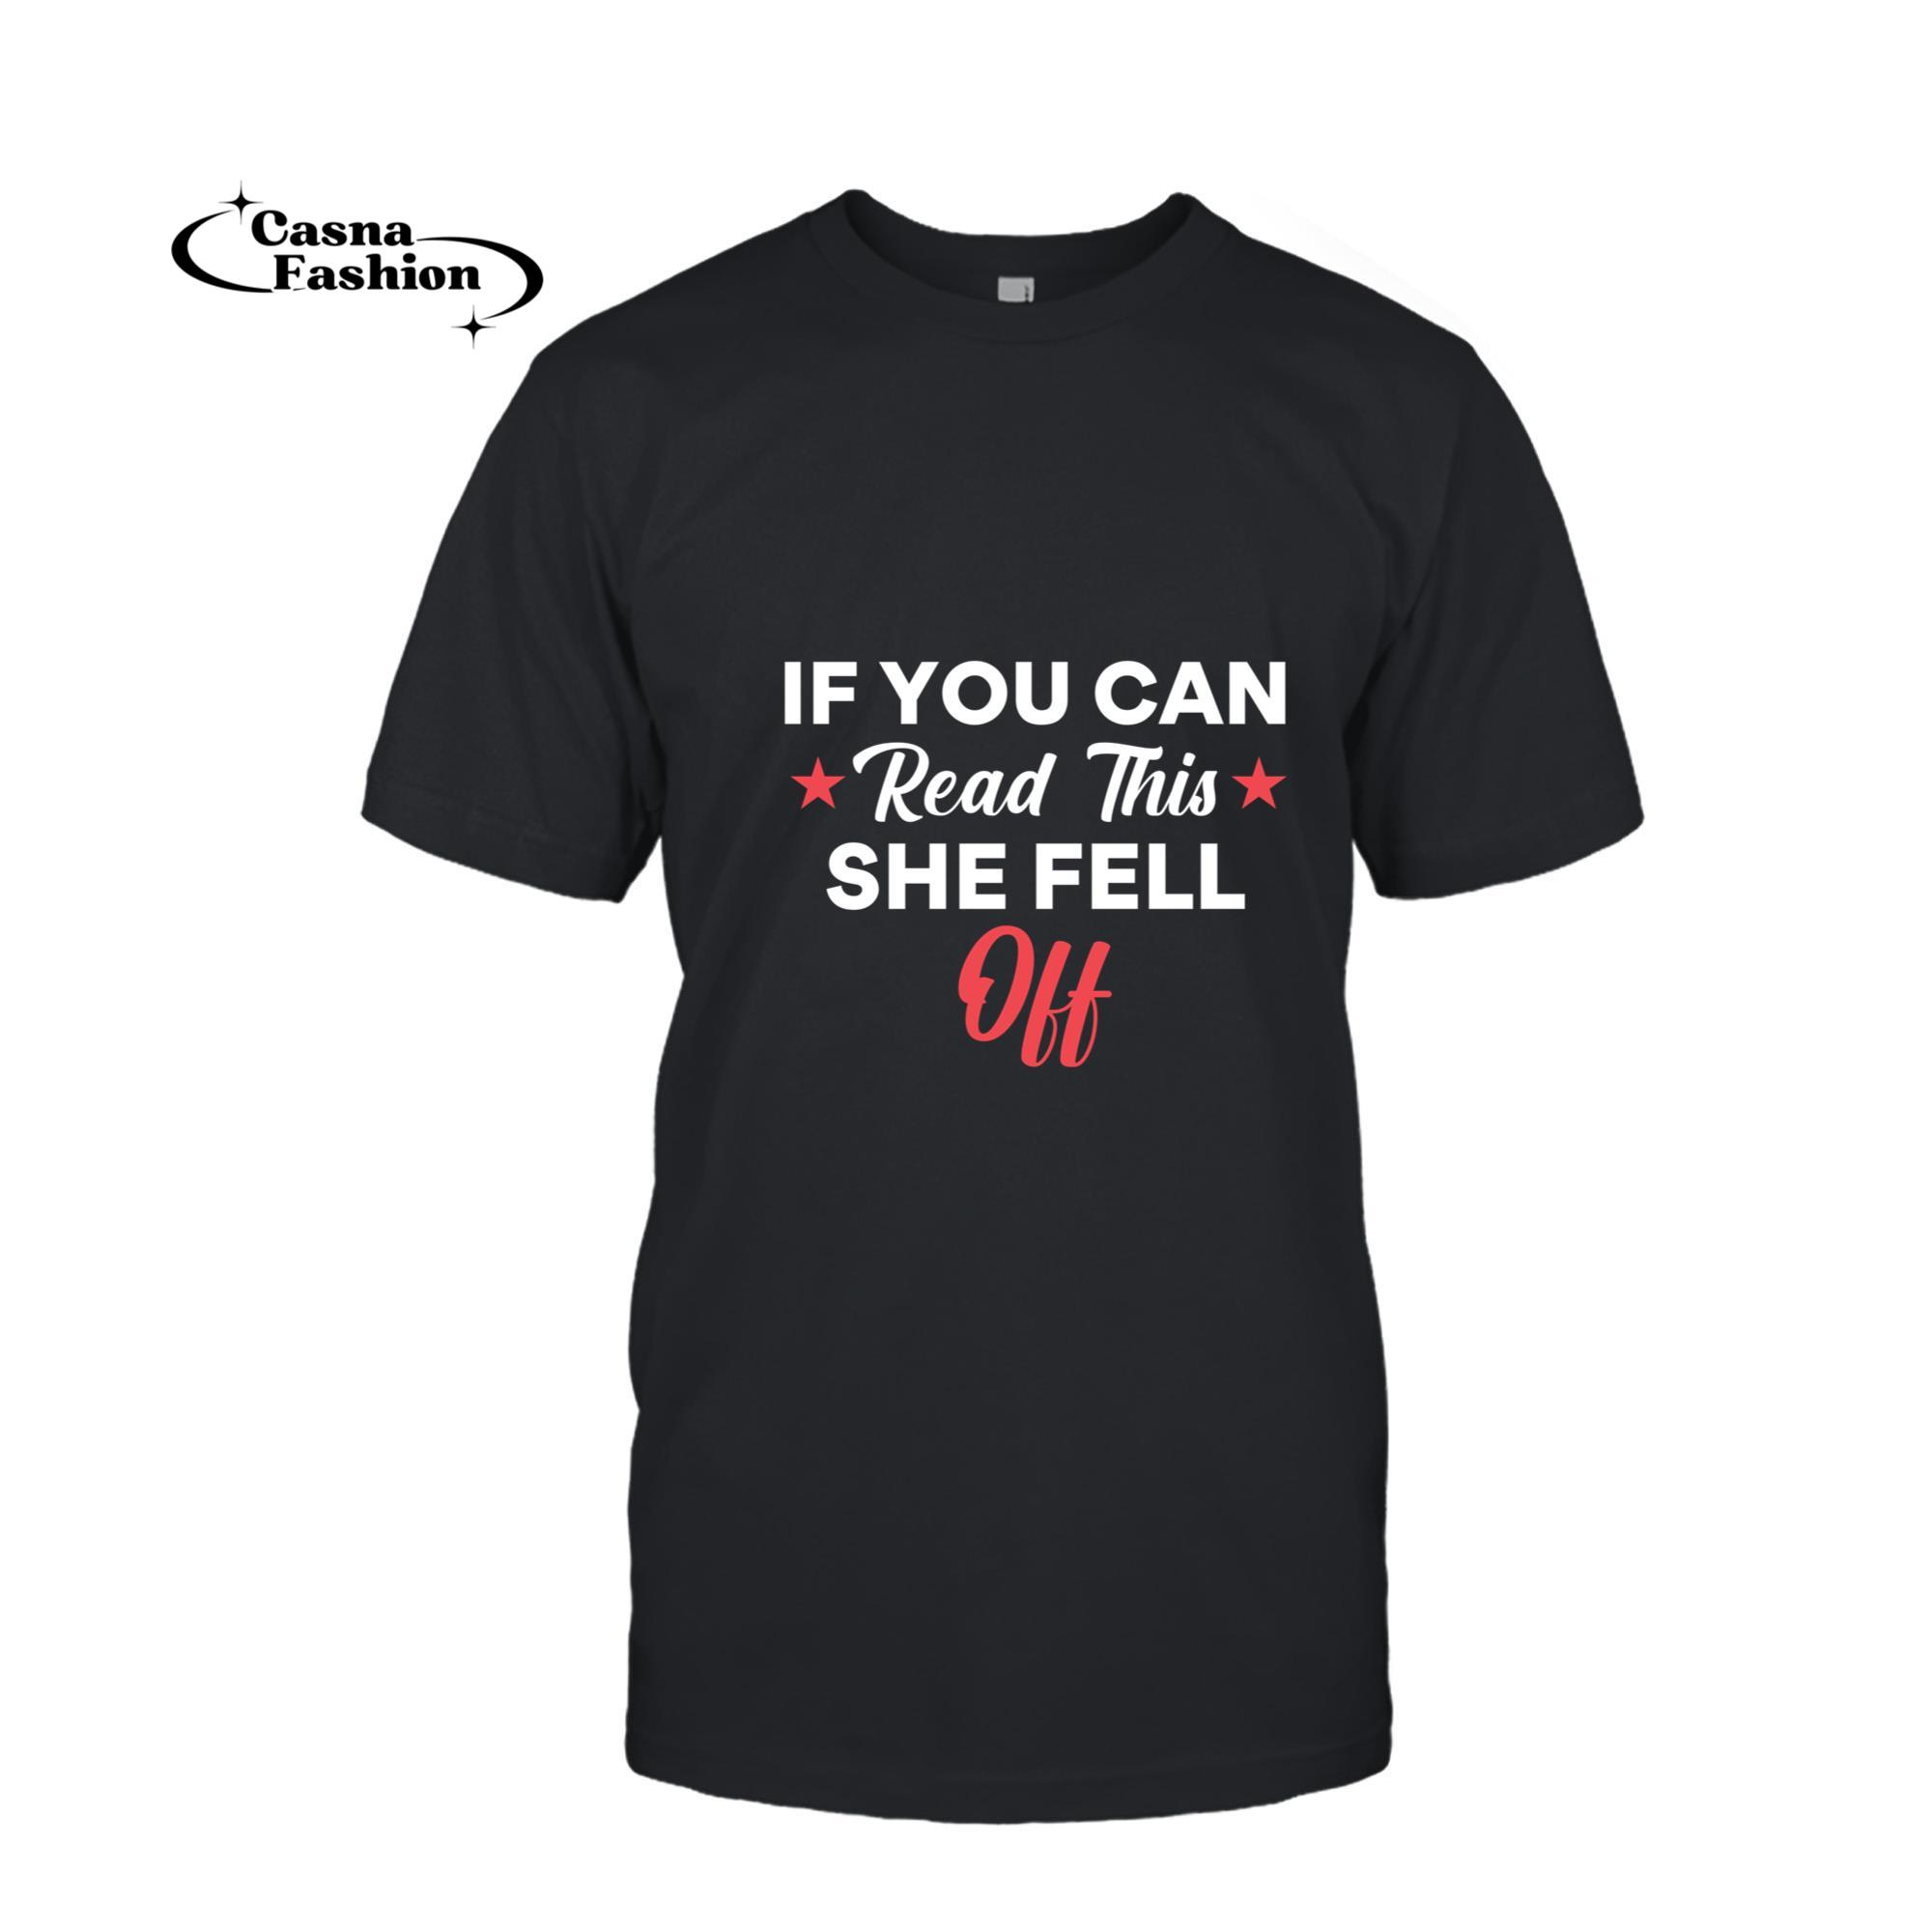 casnafashion_T-shirt_Funny If You Can Read This She Fell Off Biker Motorcycle Pullover Hoodie_T-shirt_Black